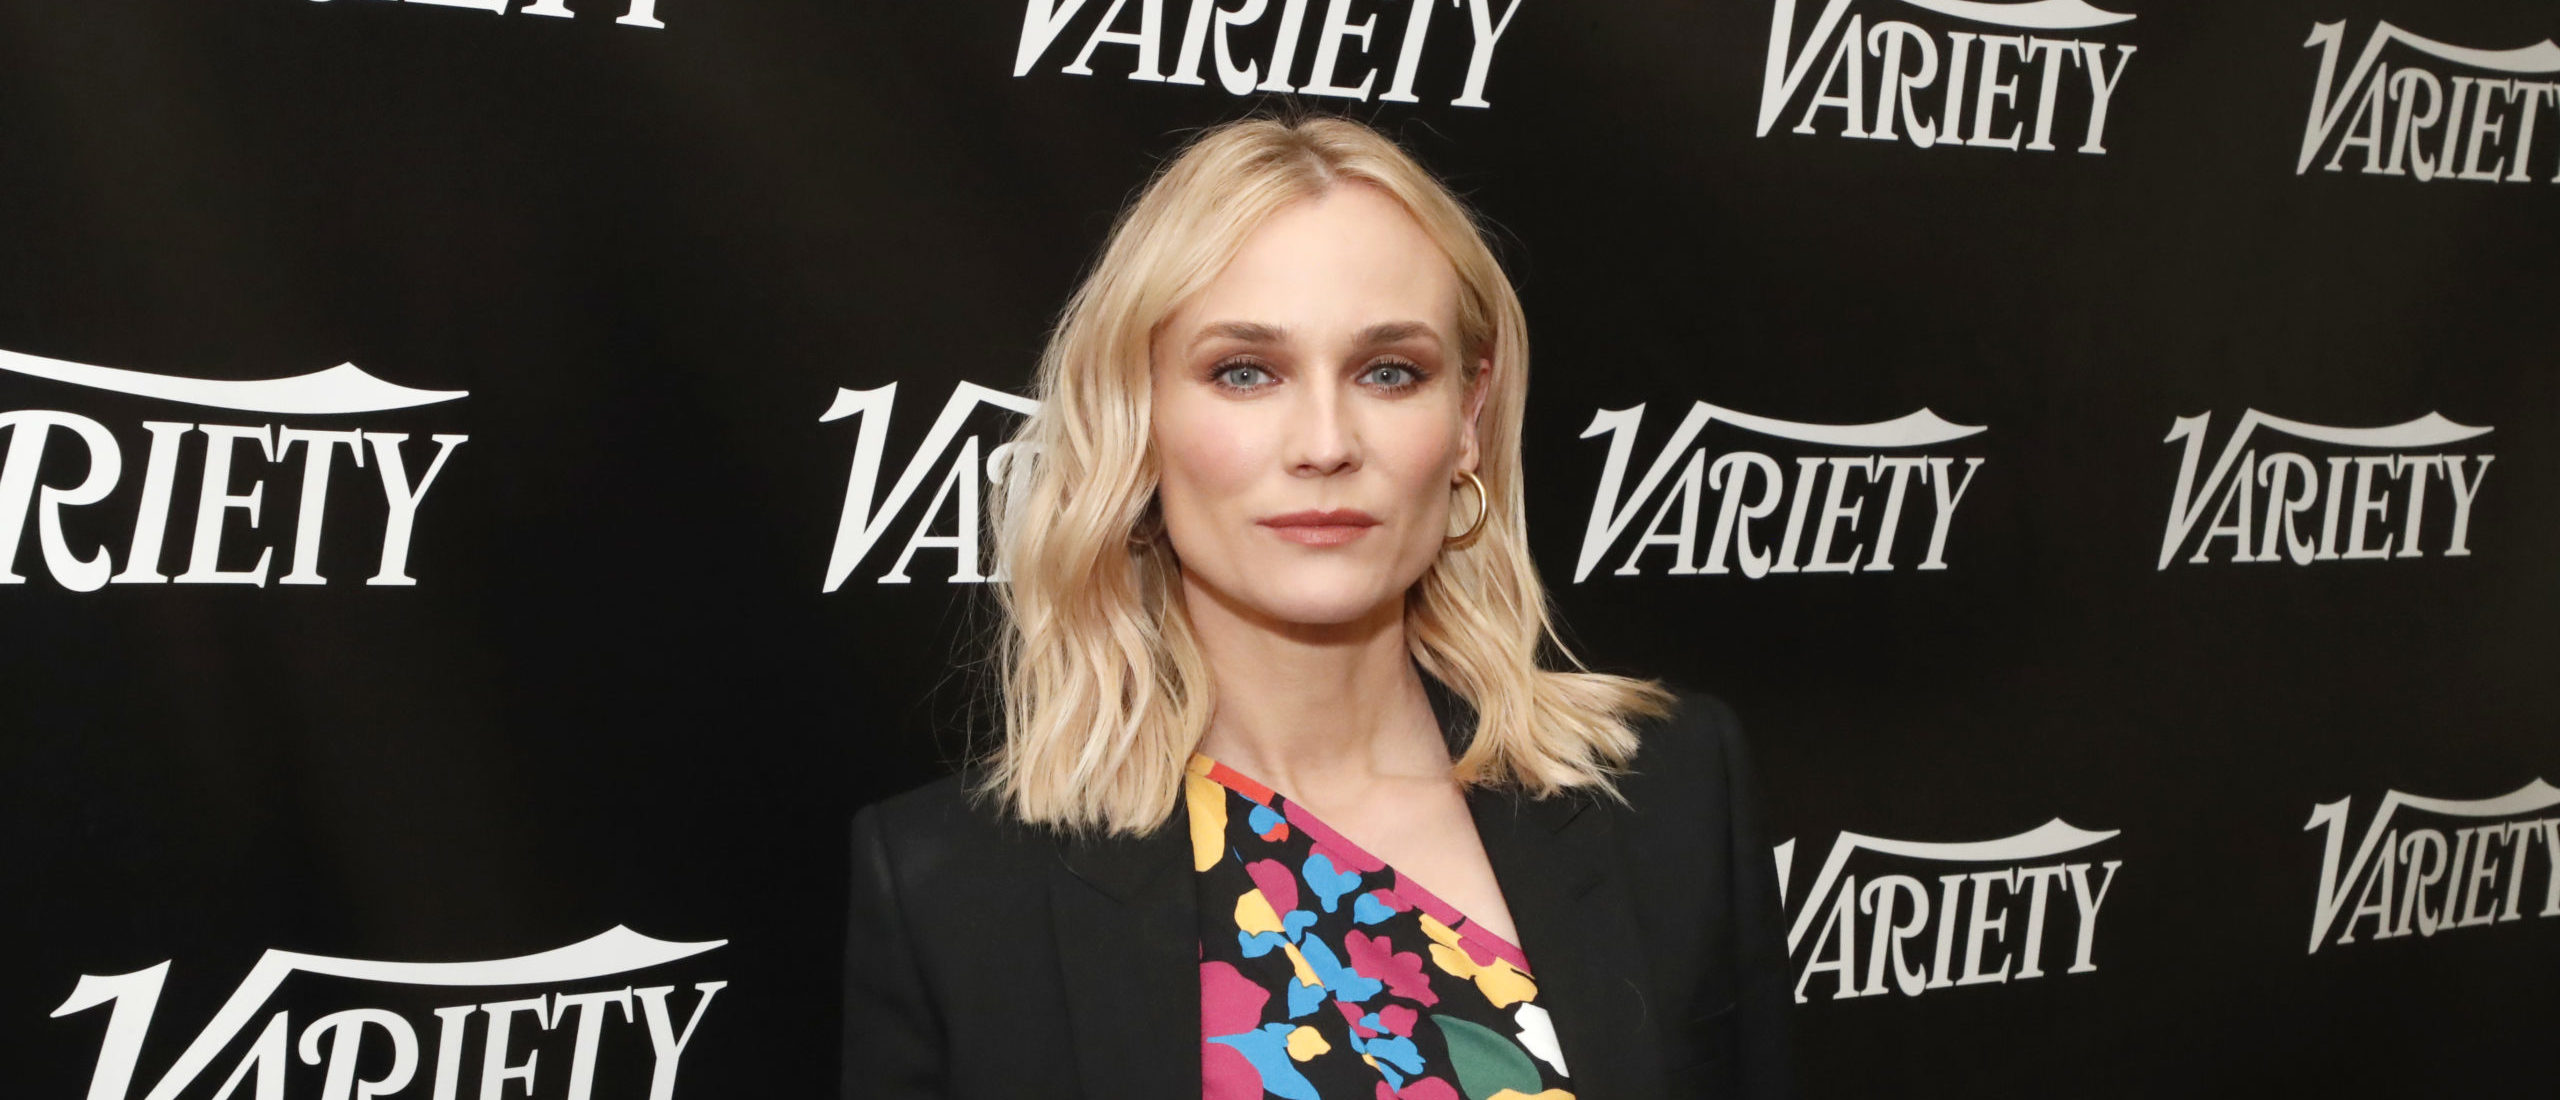 Professionally Gorgeous Actress Diane Kruger Resents Being Judged on Her  Looks Auditioning to Play the World's Most Beautiful Woman in 'Troy